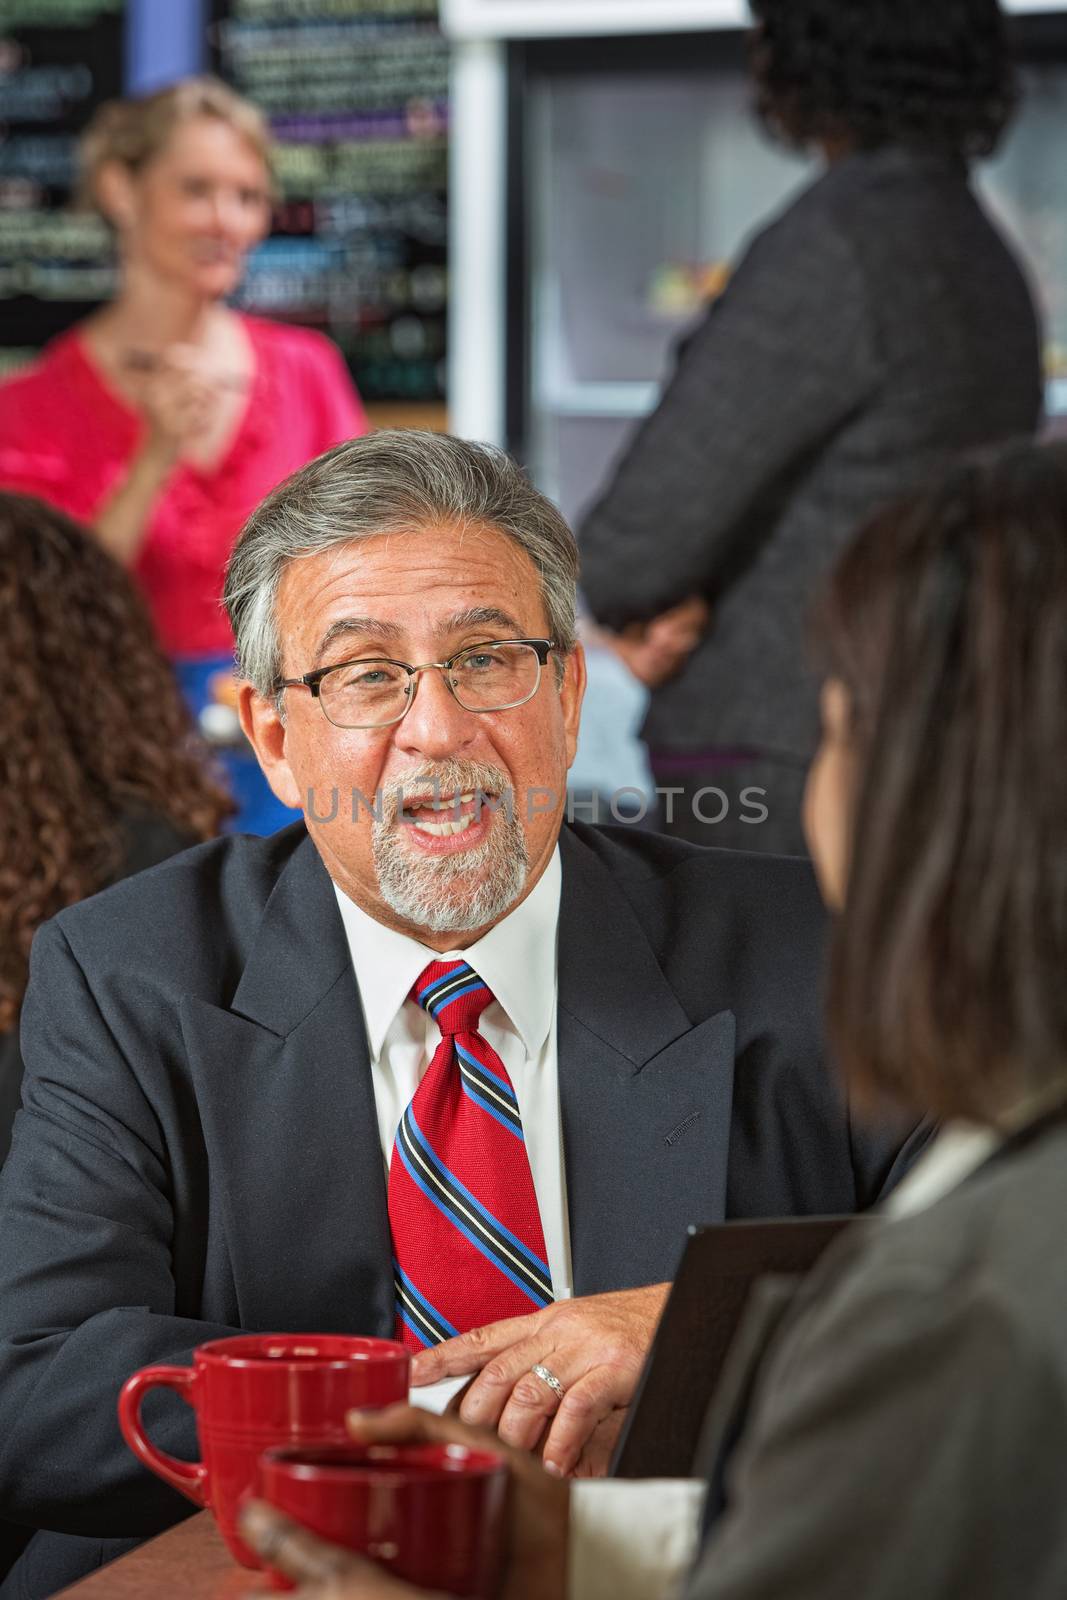 Business man with beard and glasses talking to coworker